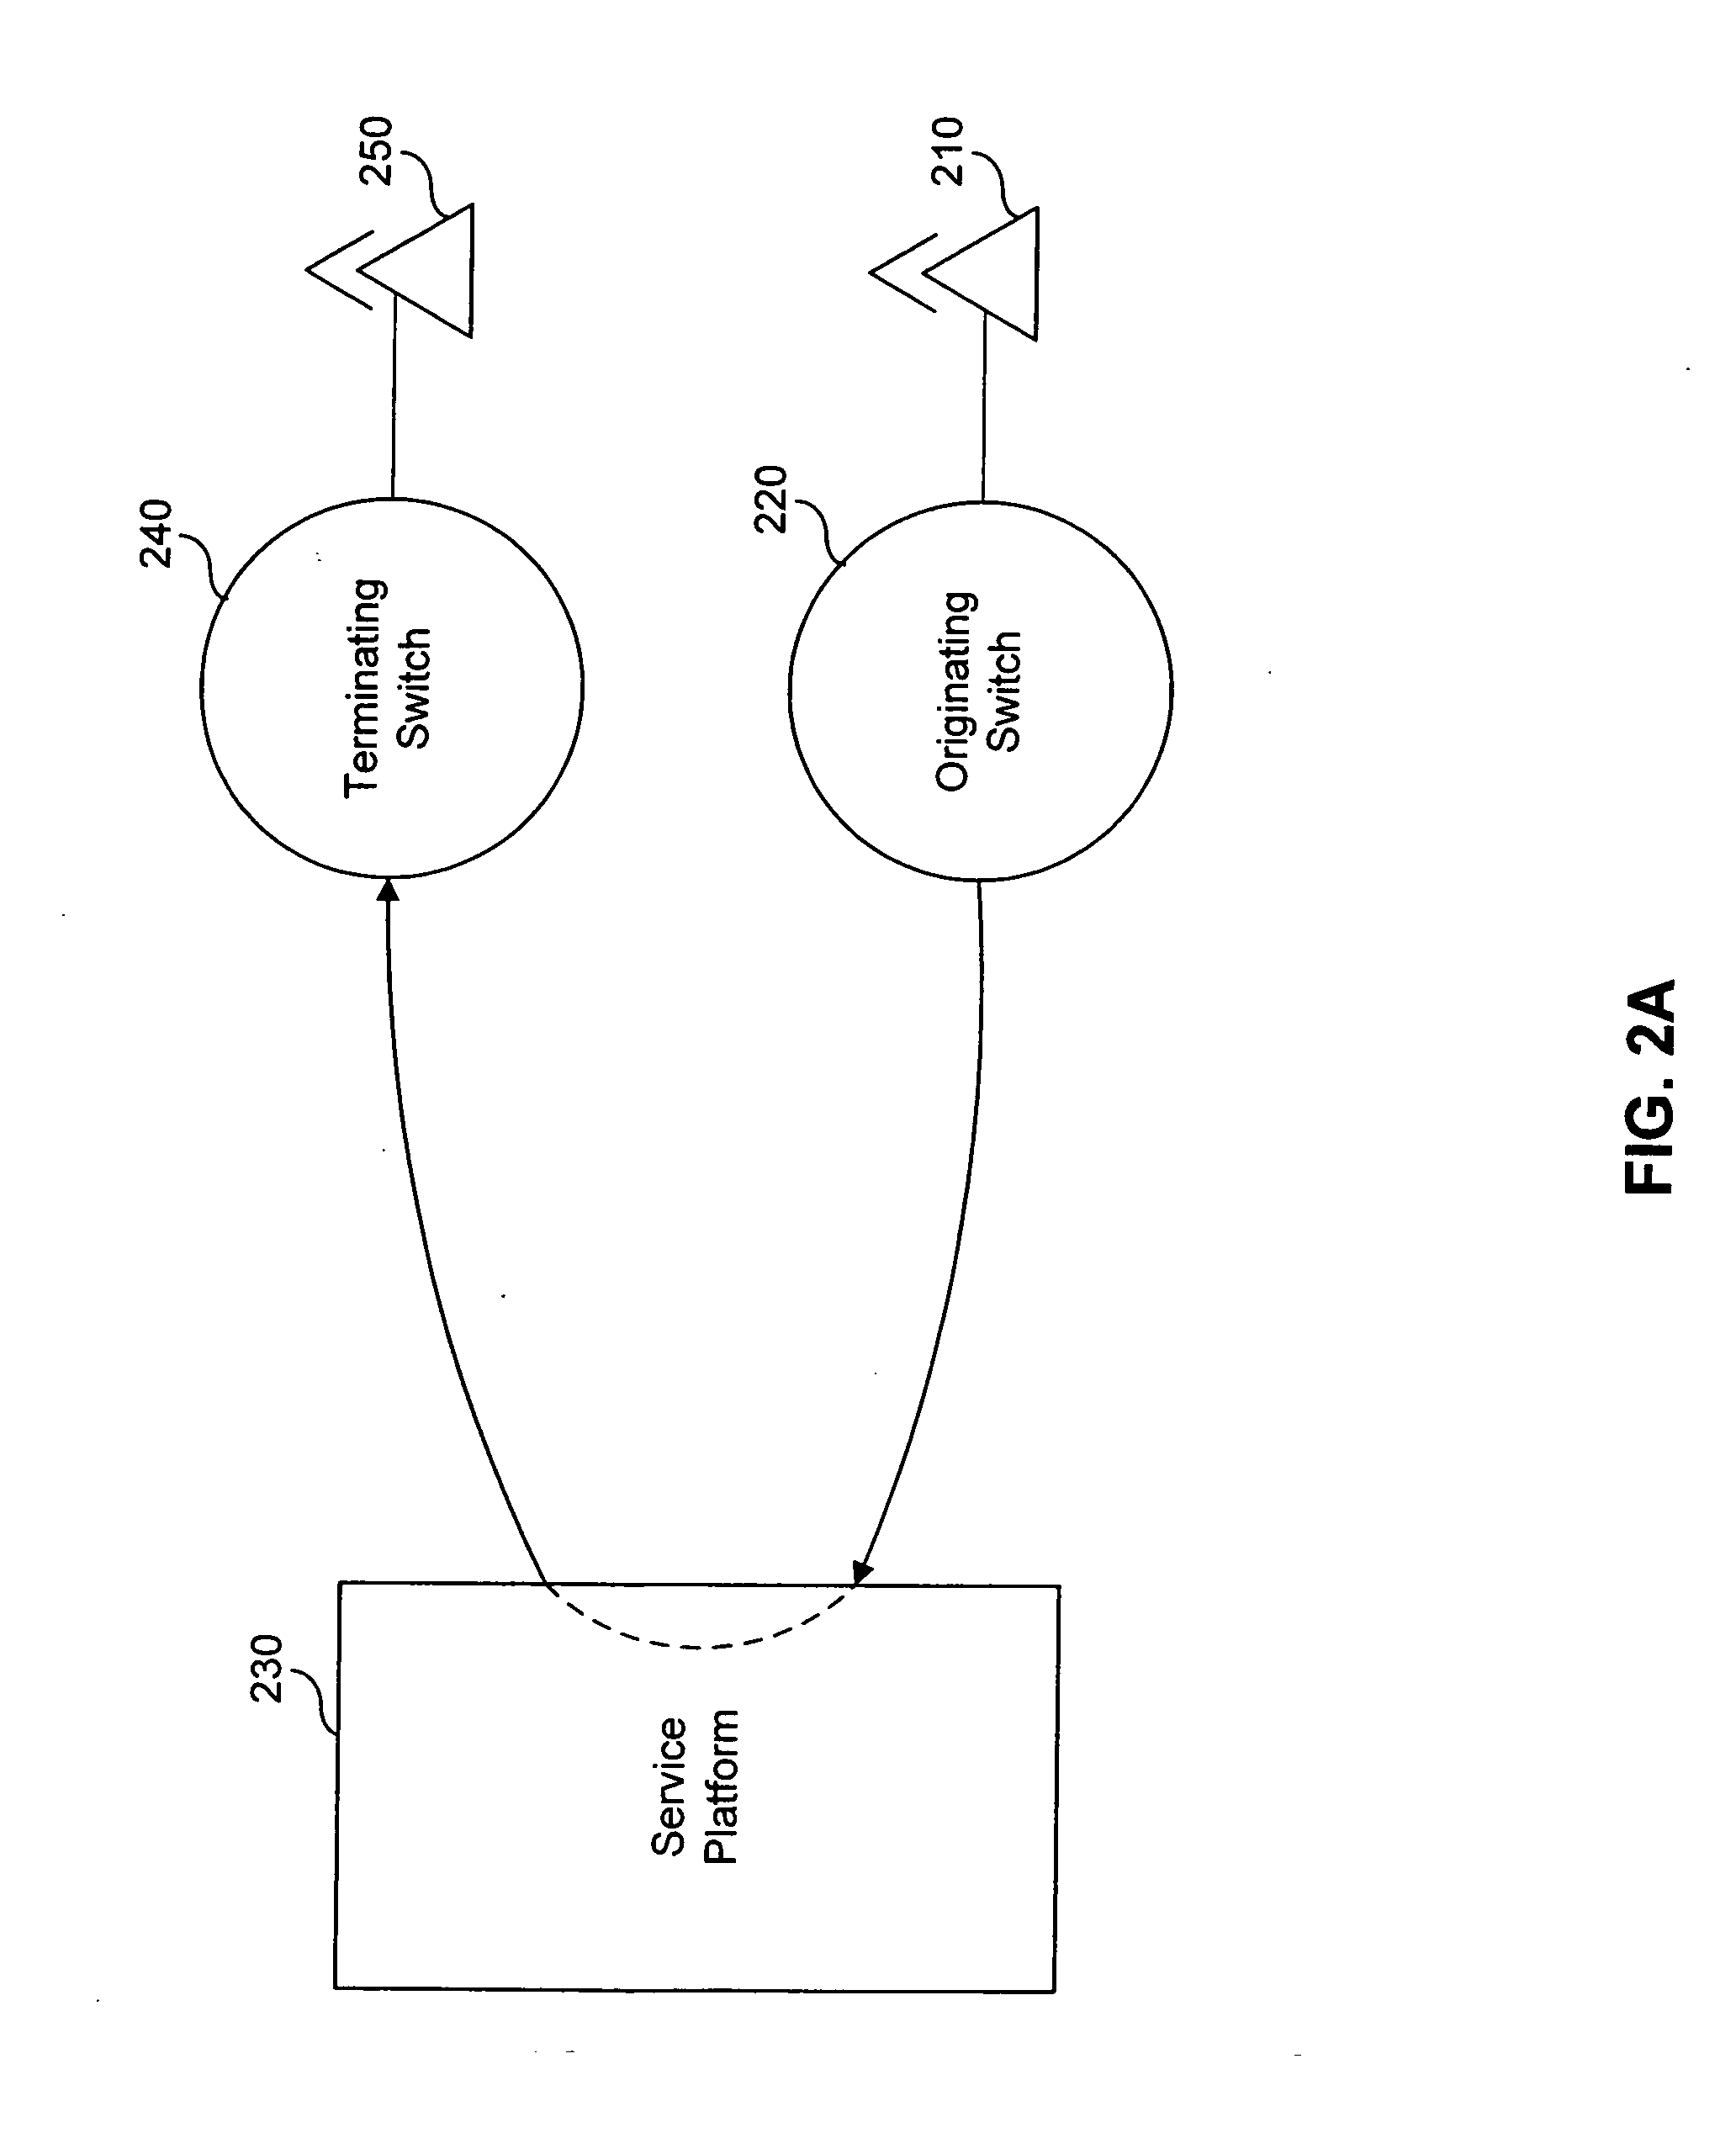 System and method for proxy signaling manipulation in an IP telephony network